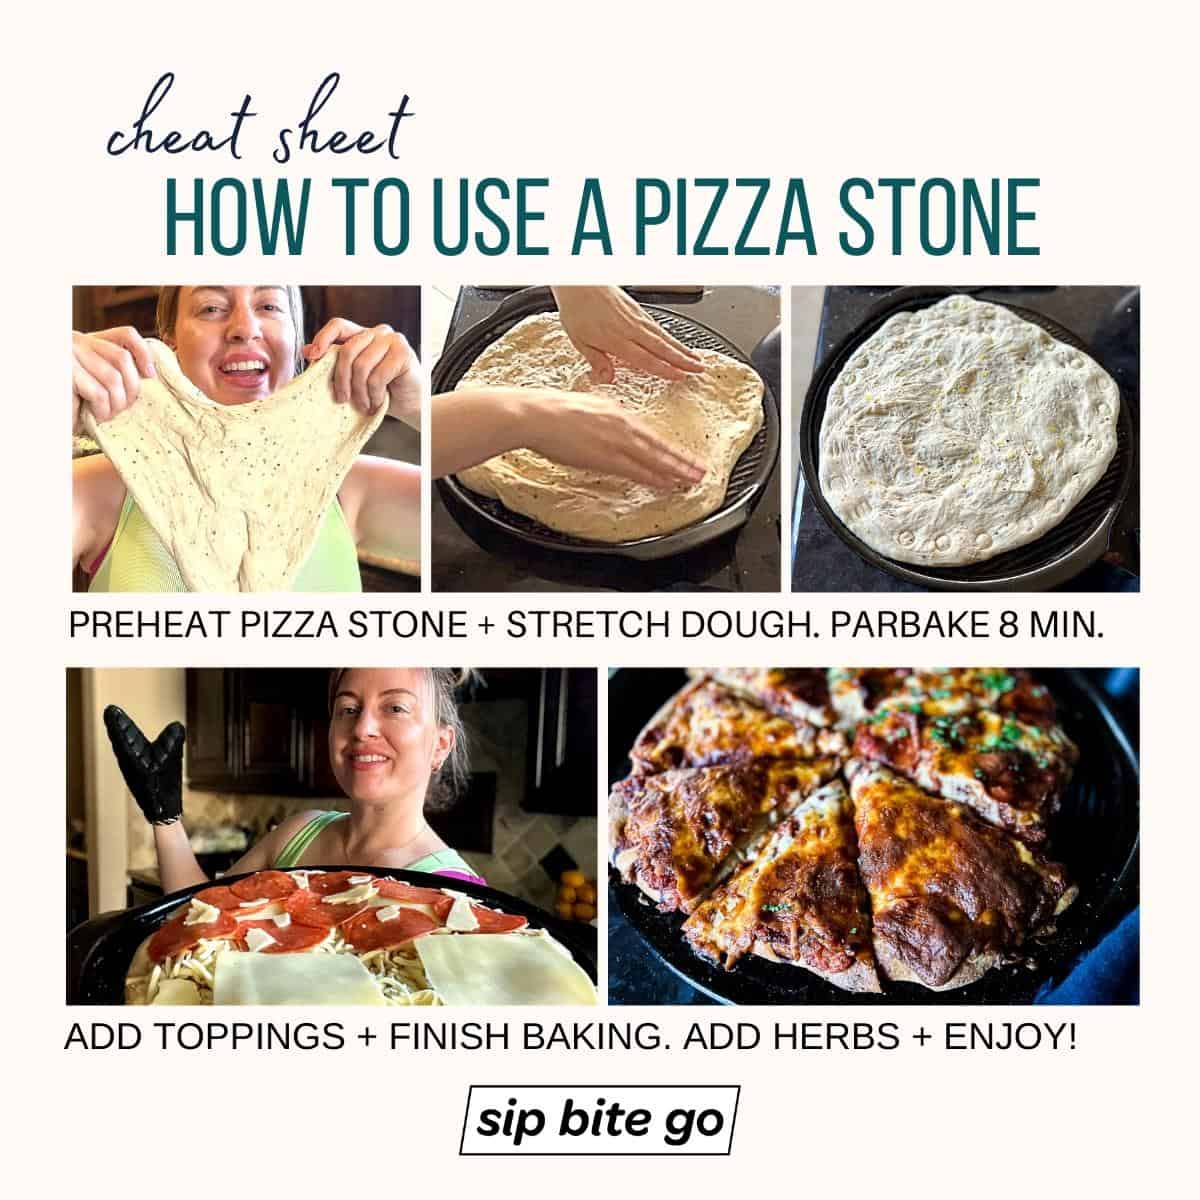 Infographic with recipe for how to use a pizza stone in oven